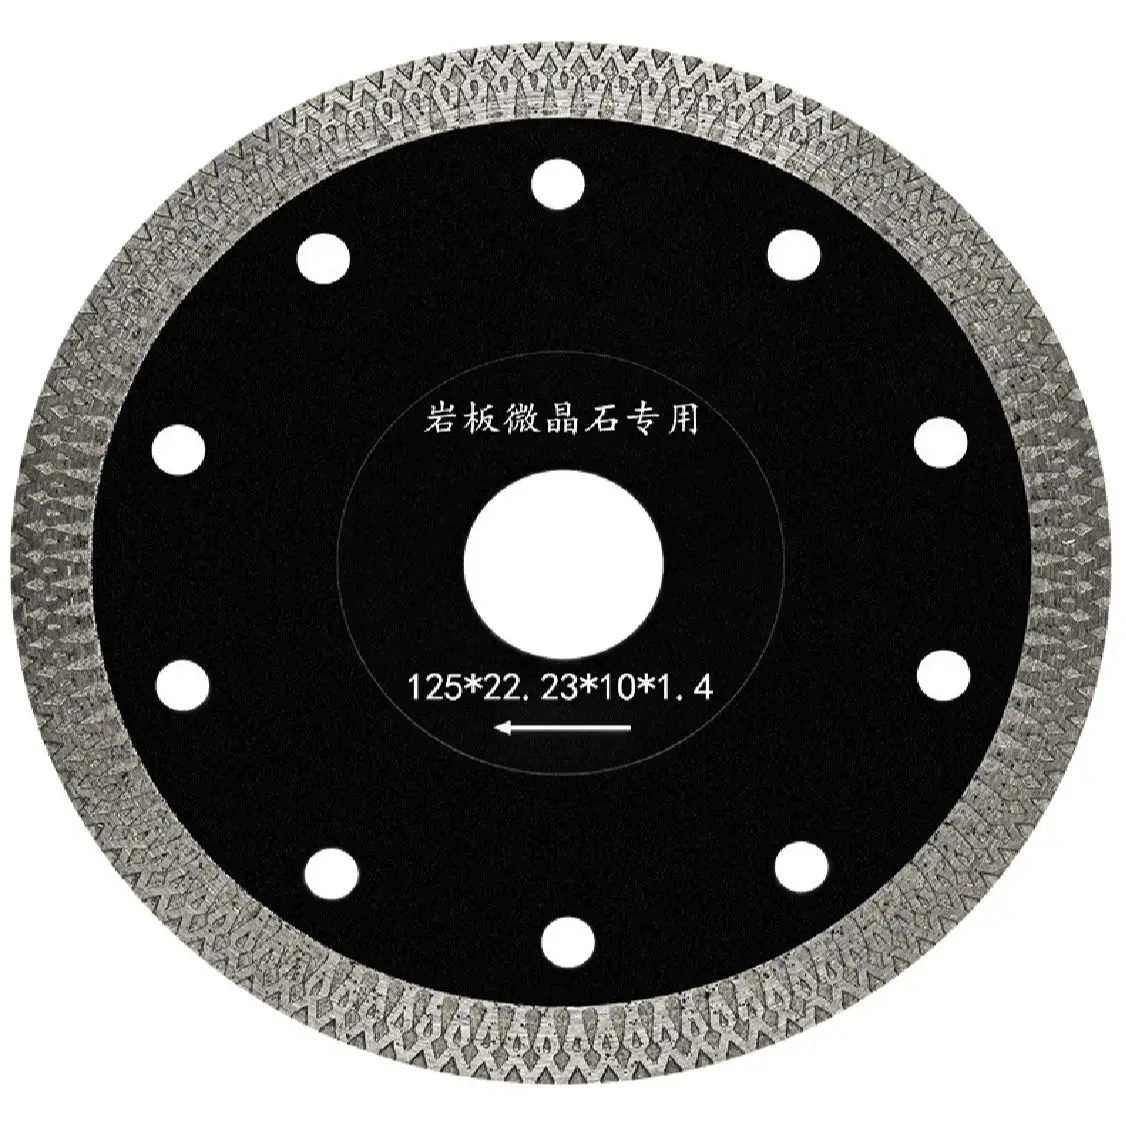 

4pc/5pc 105/115/125mm Diamond Saw Blade For Porcelain Tile Ceramic Dry/Wet Cutting Stone Cut off Saw Blade Diamond Cutting Disc